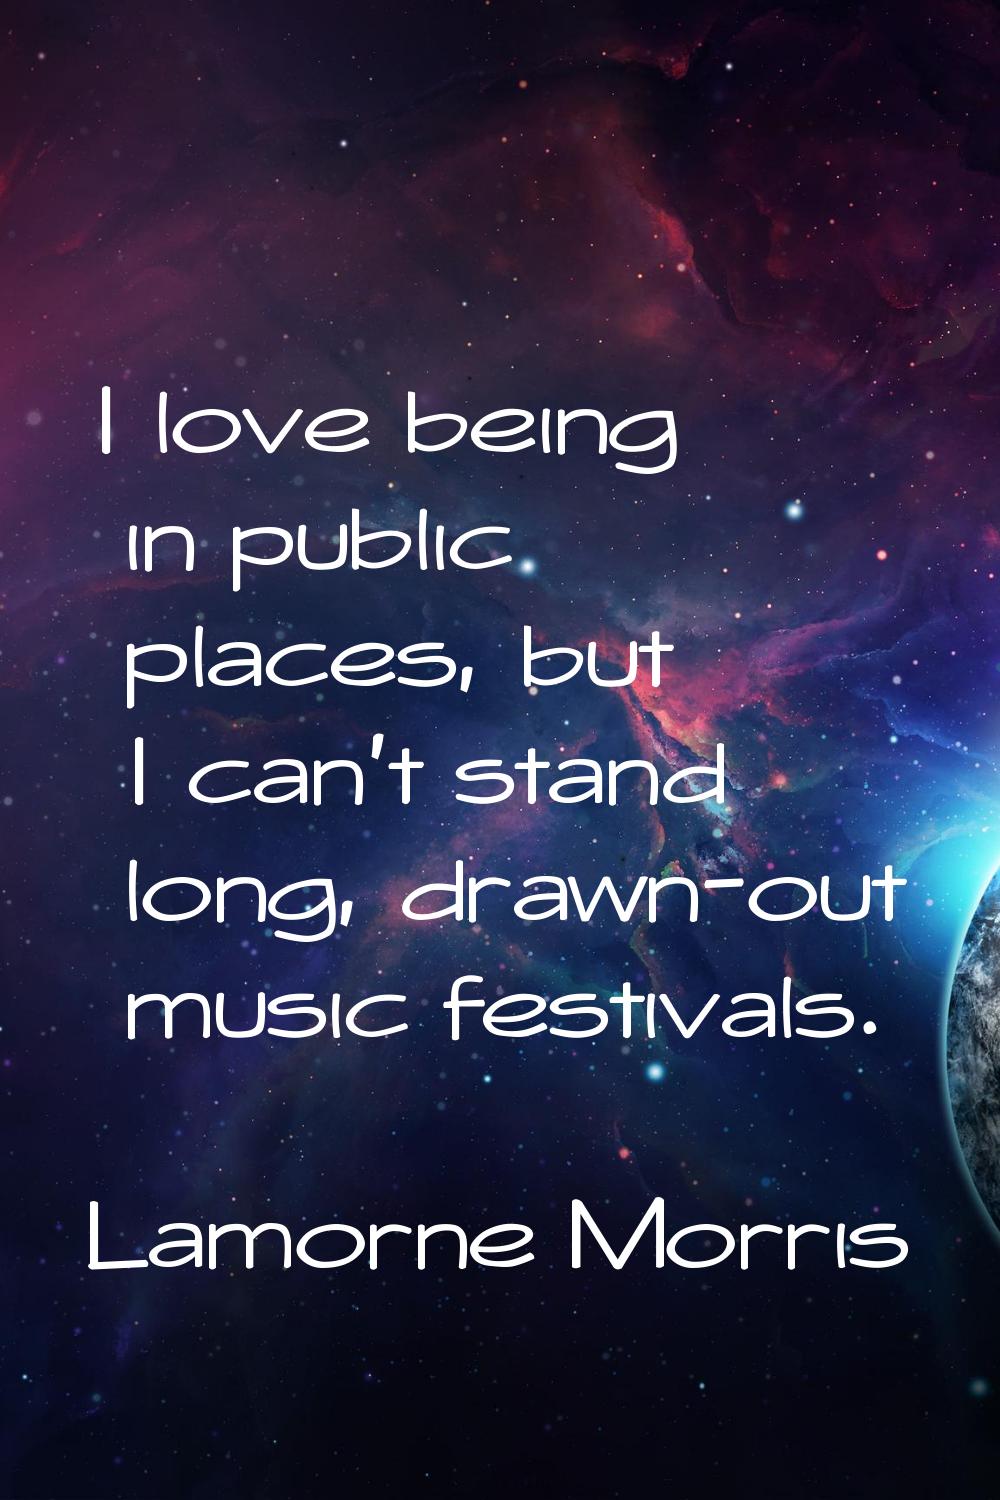 I love being in public places, but I can't stand long, drawn-out music festivals.